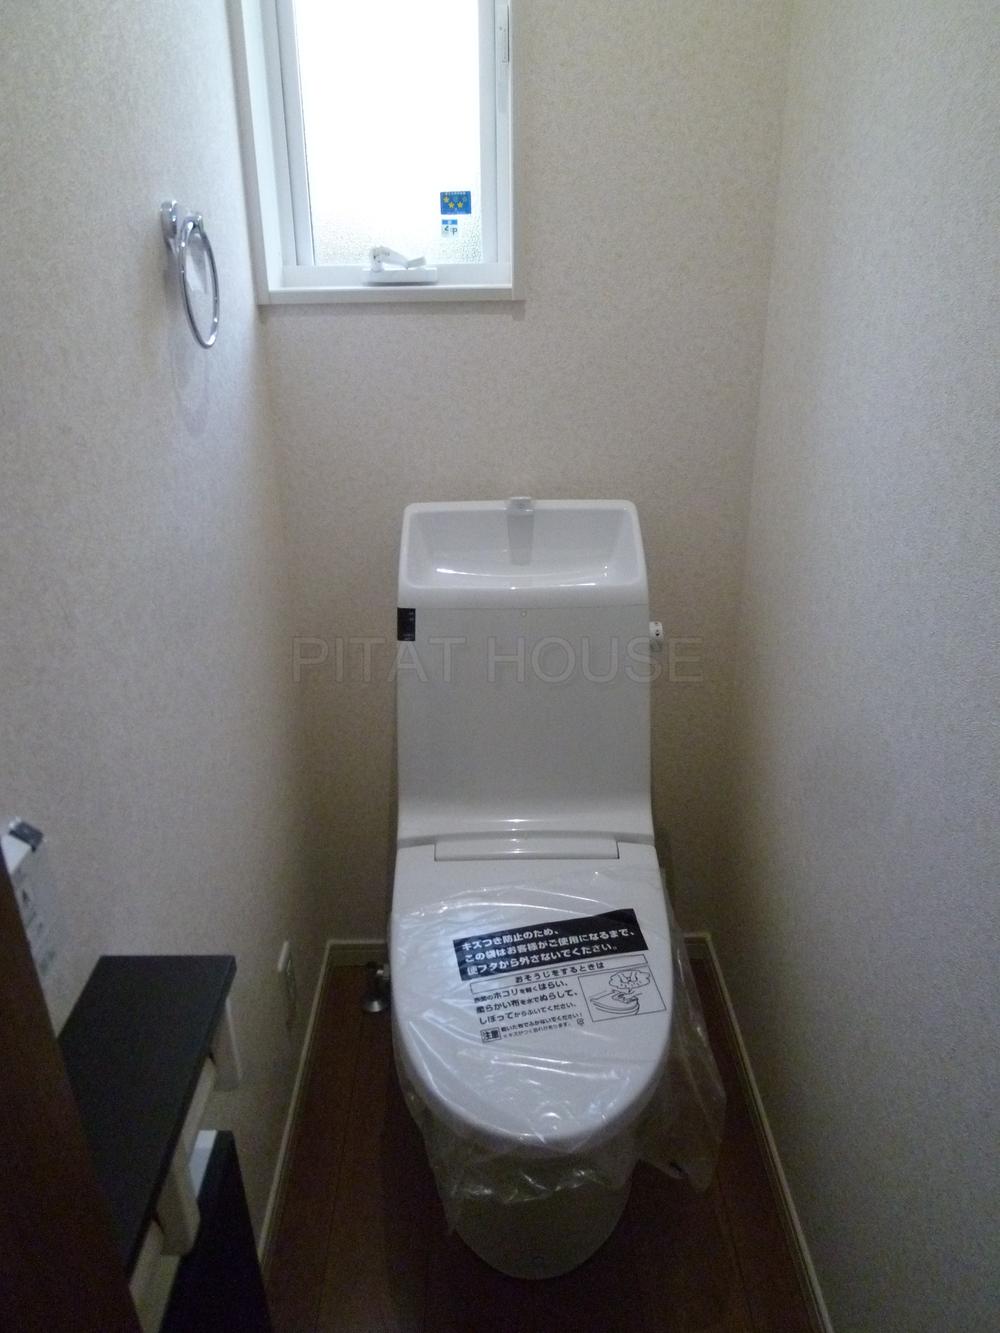 Toilet.  ◆ It is a bidet and a shelf with a toilet.